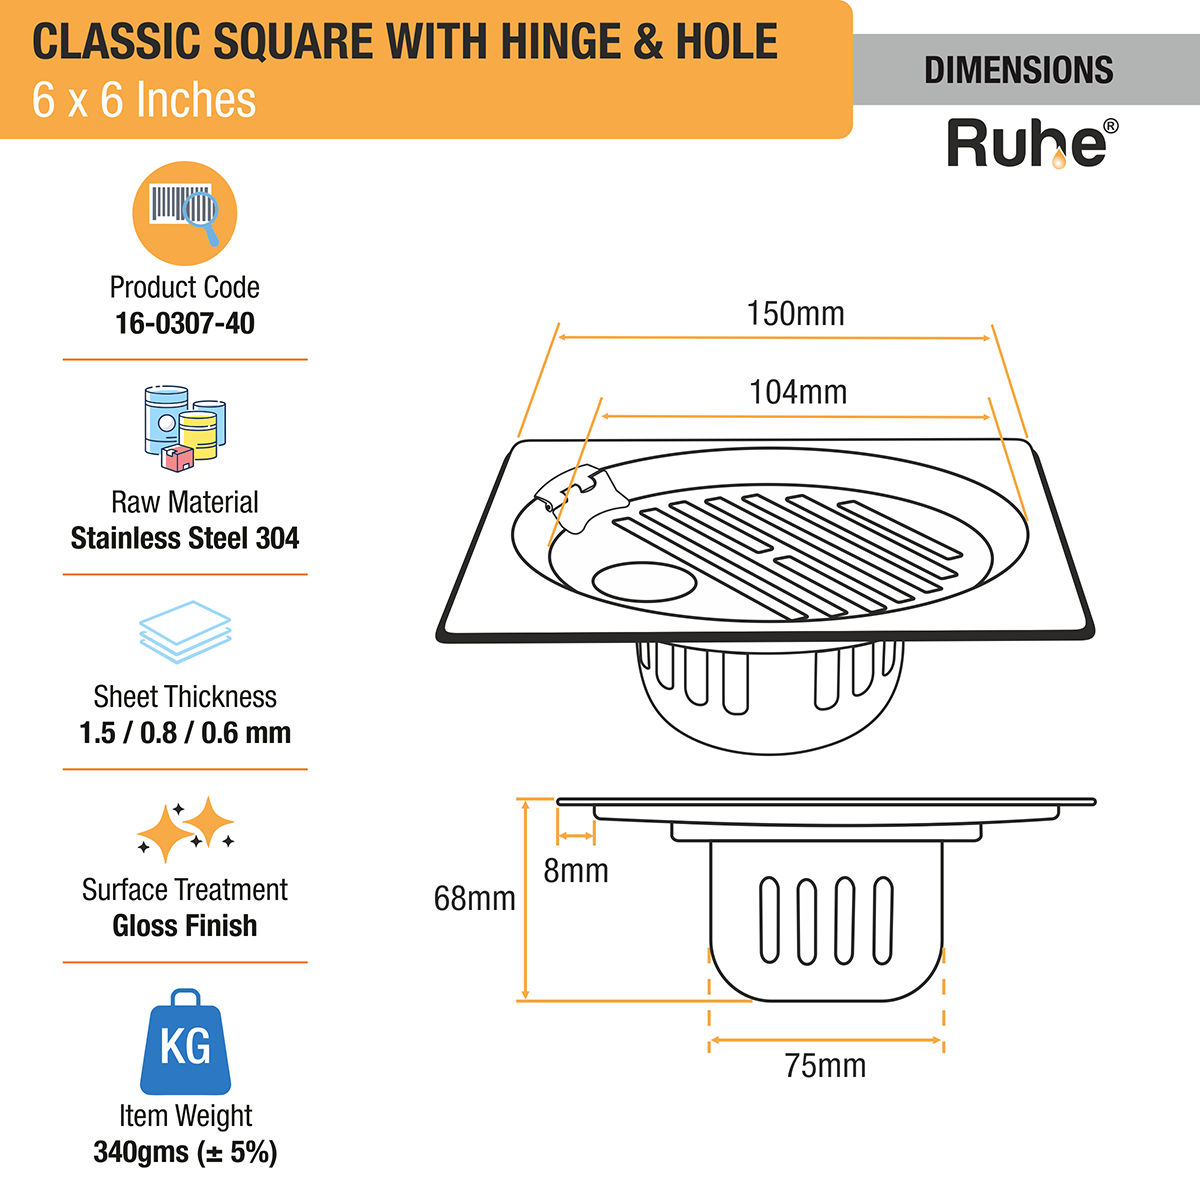 Classic Square Floor Drain (6 x 6 Inches) with Hinge, Hole & Cockroach Trap (304 Grade) dimensions and size